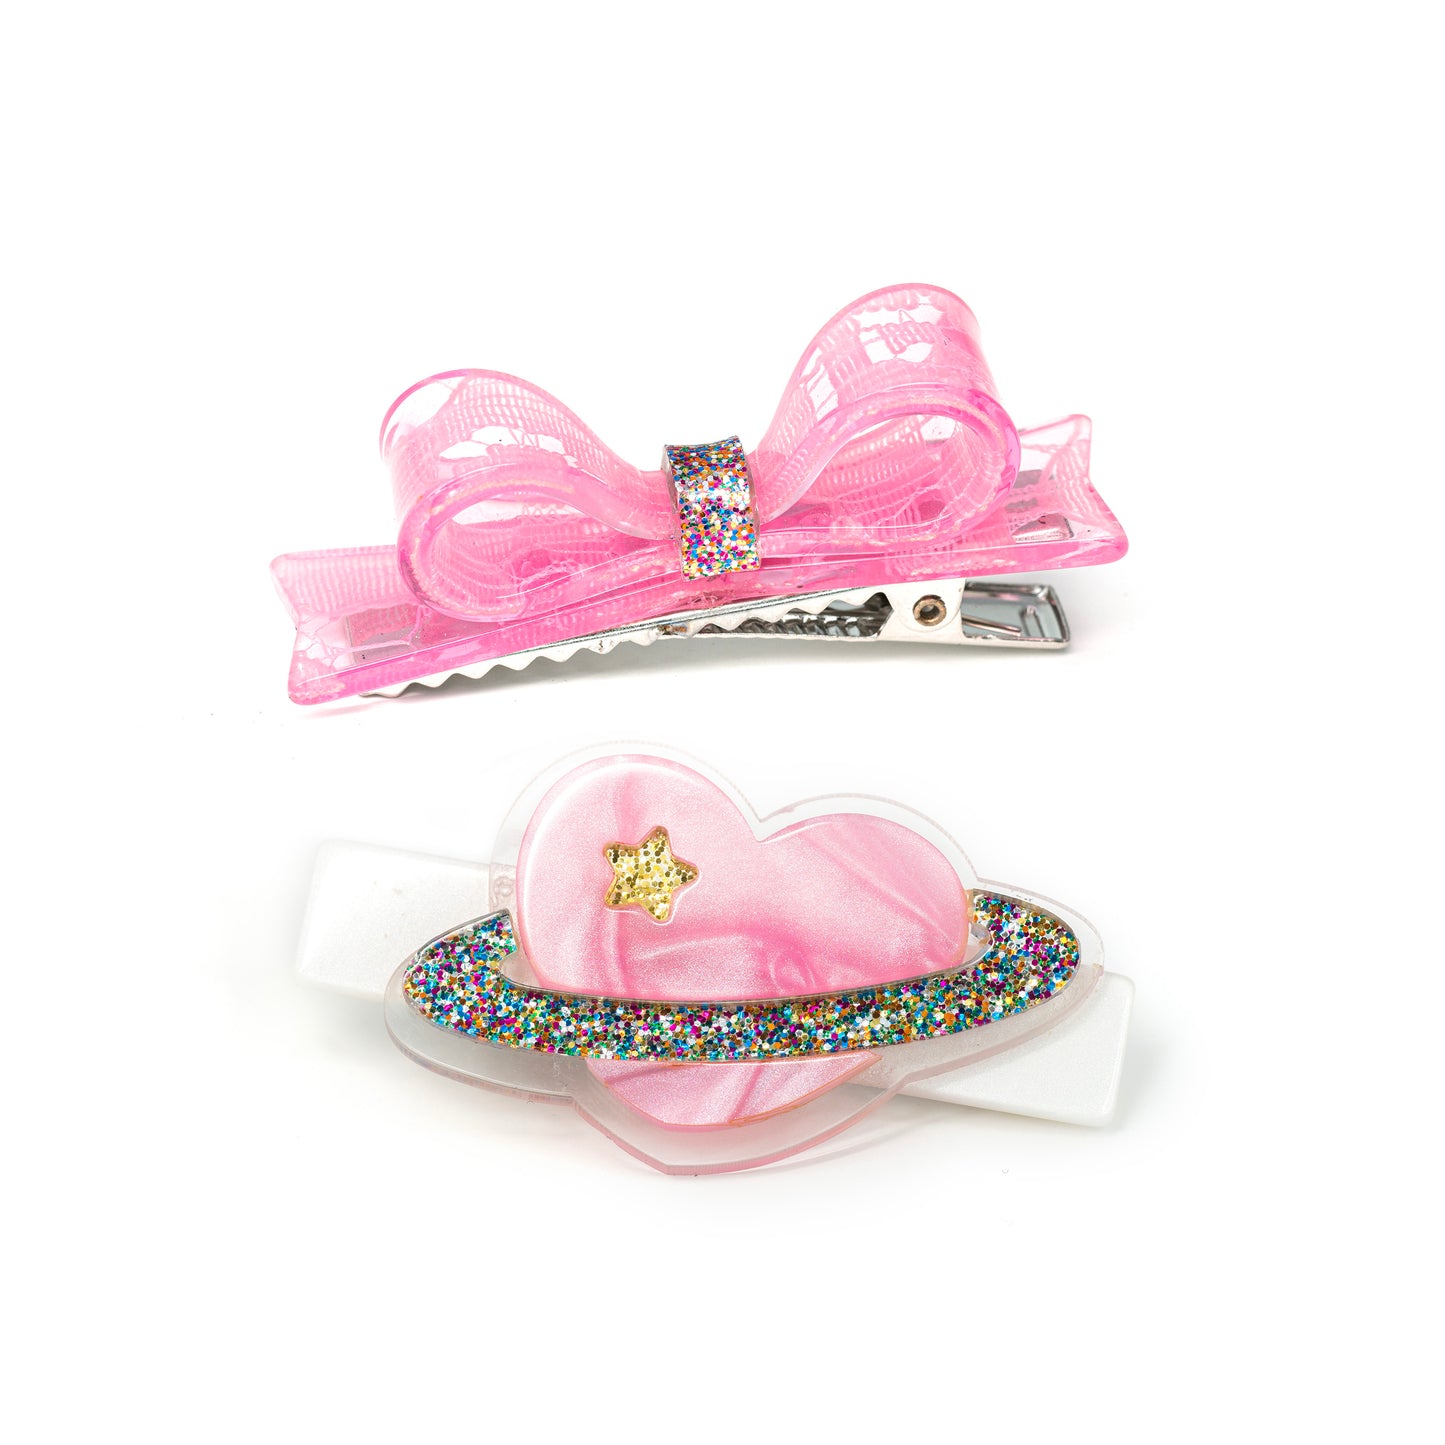 VAL24 - Heart Planet with Bow Pearlized Pink Hair Clips